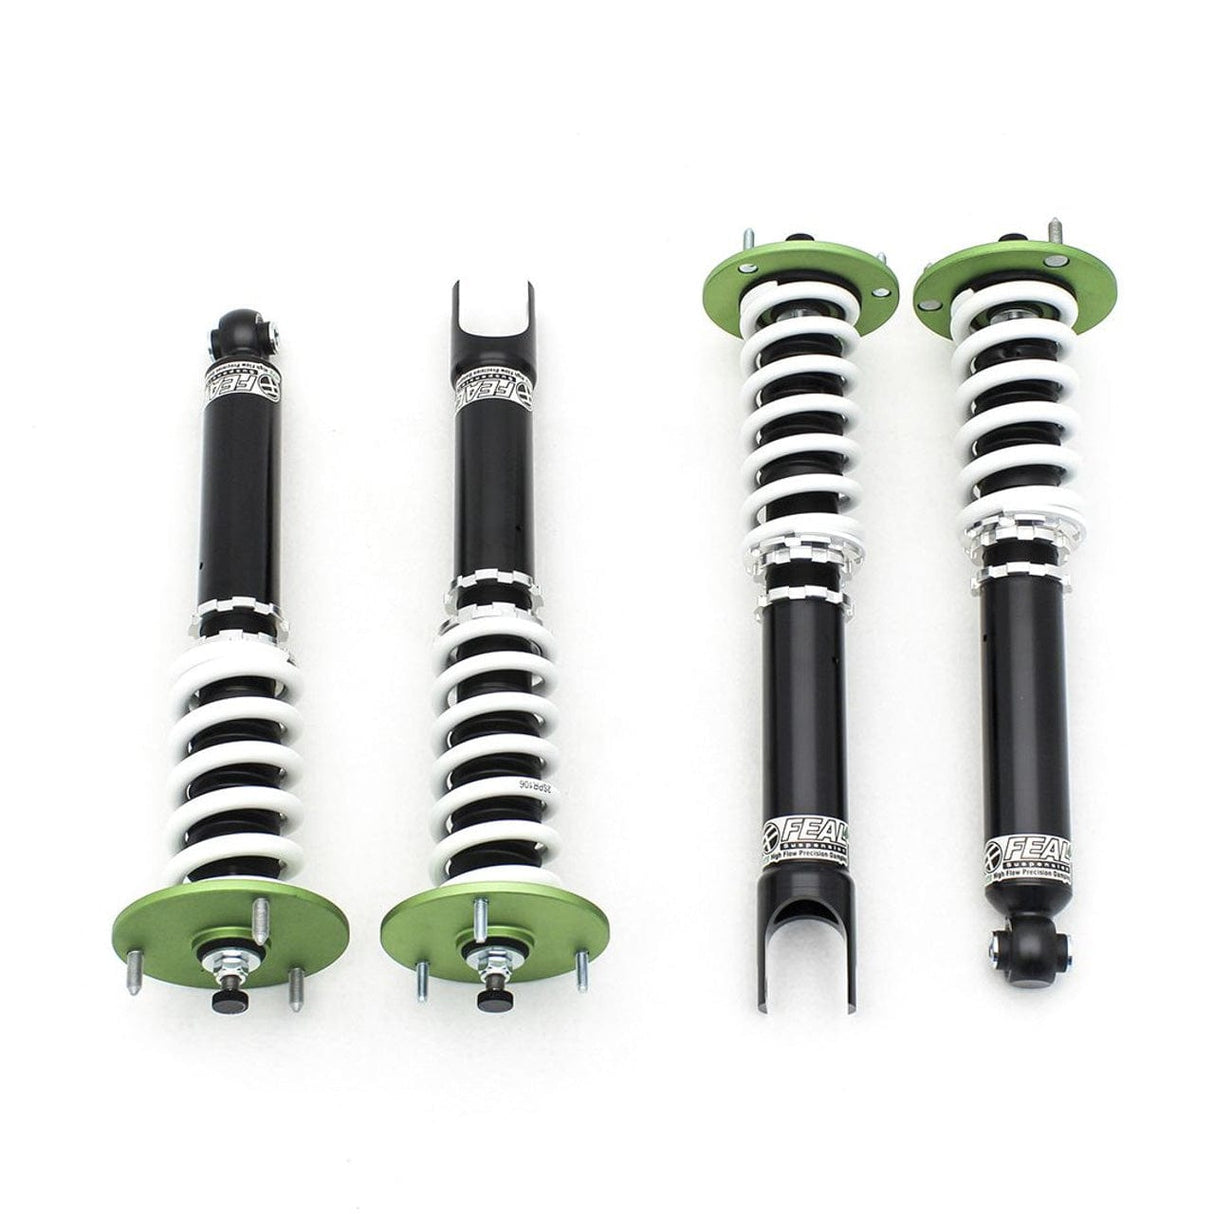 Feal 441 Coilovers - 1987-1992 Mitsubishi Galant VR4